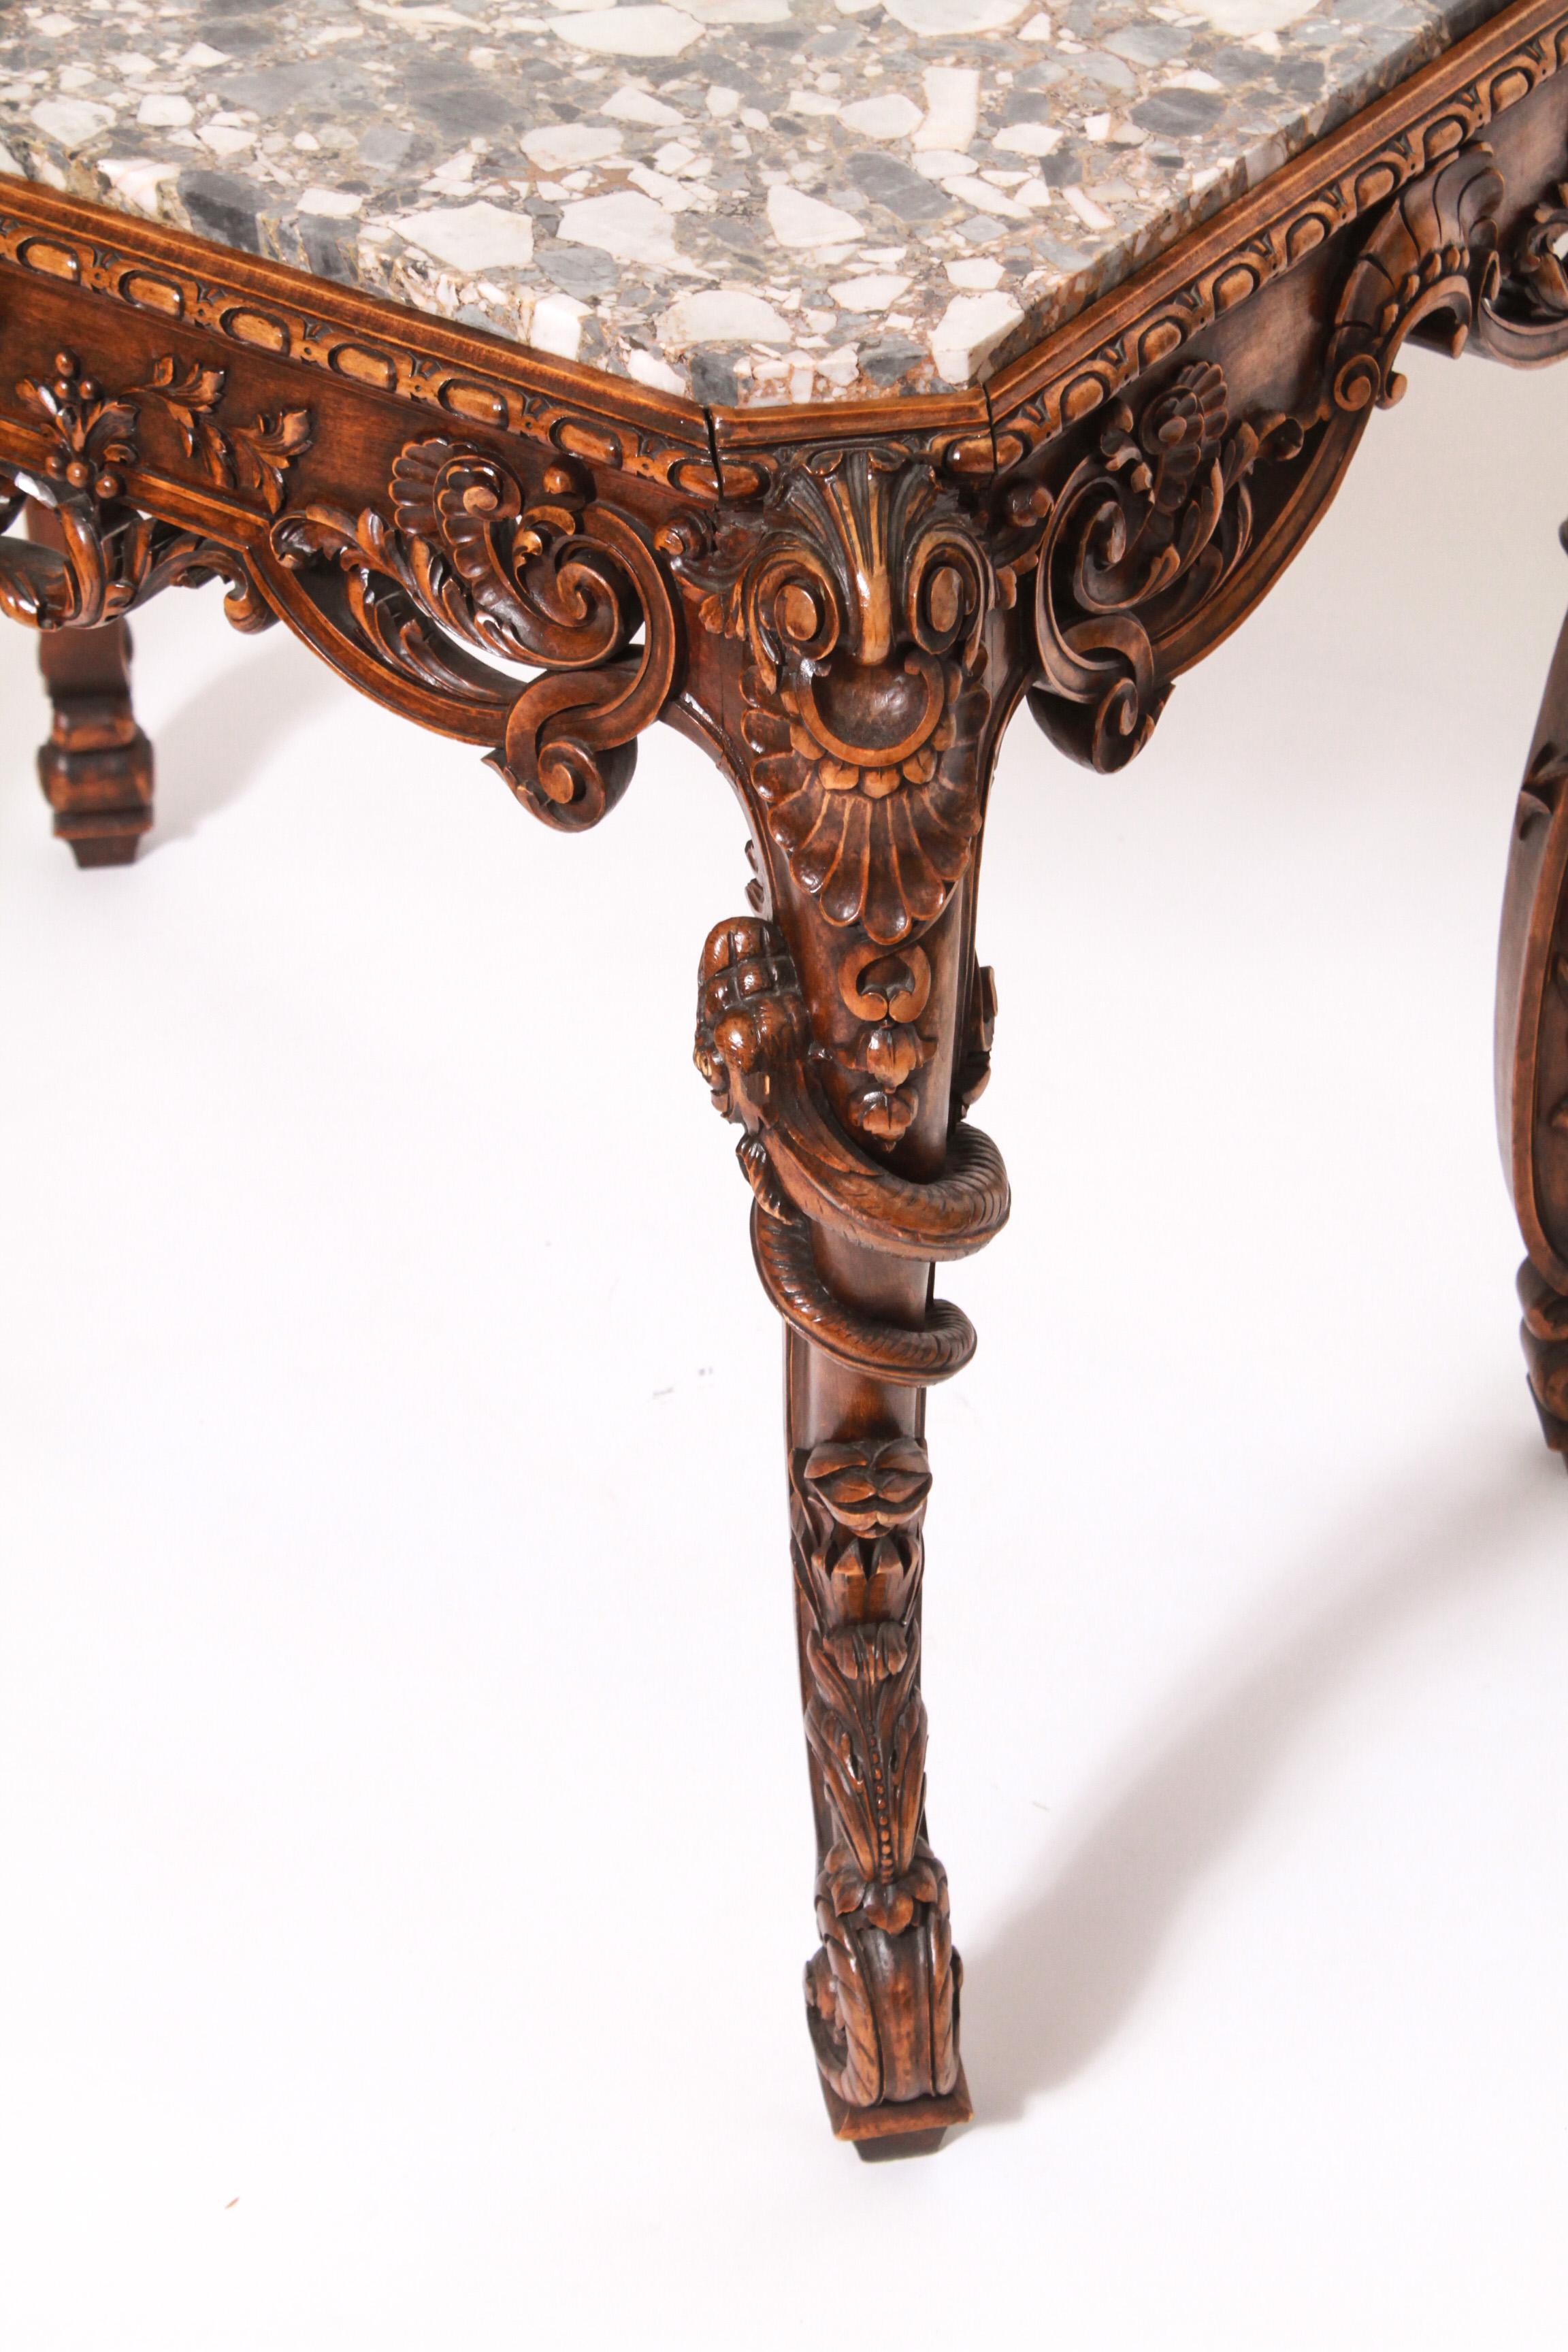 Rococo Revival Rosel Rococo Style Carved Wood and Marble Table